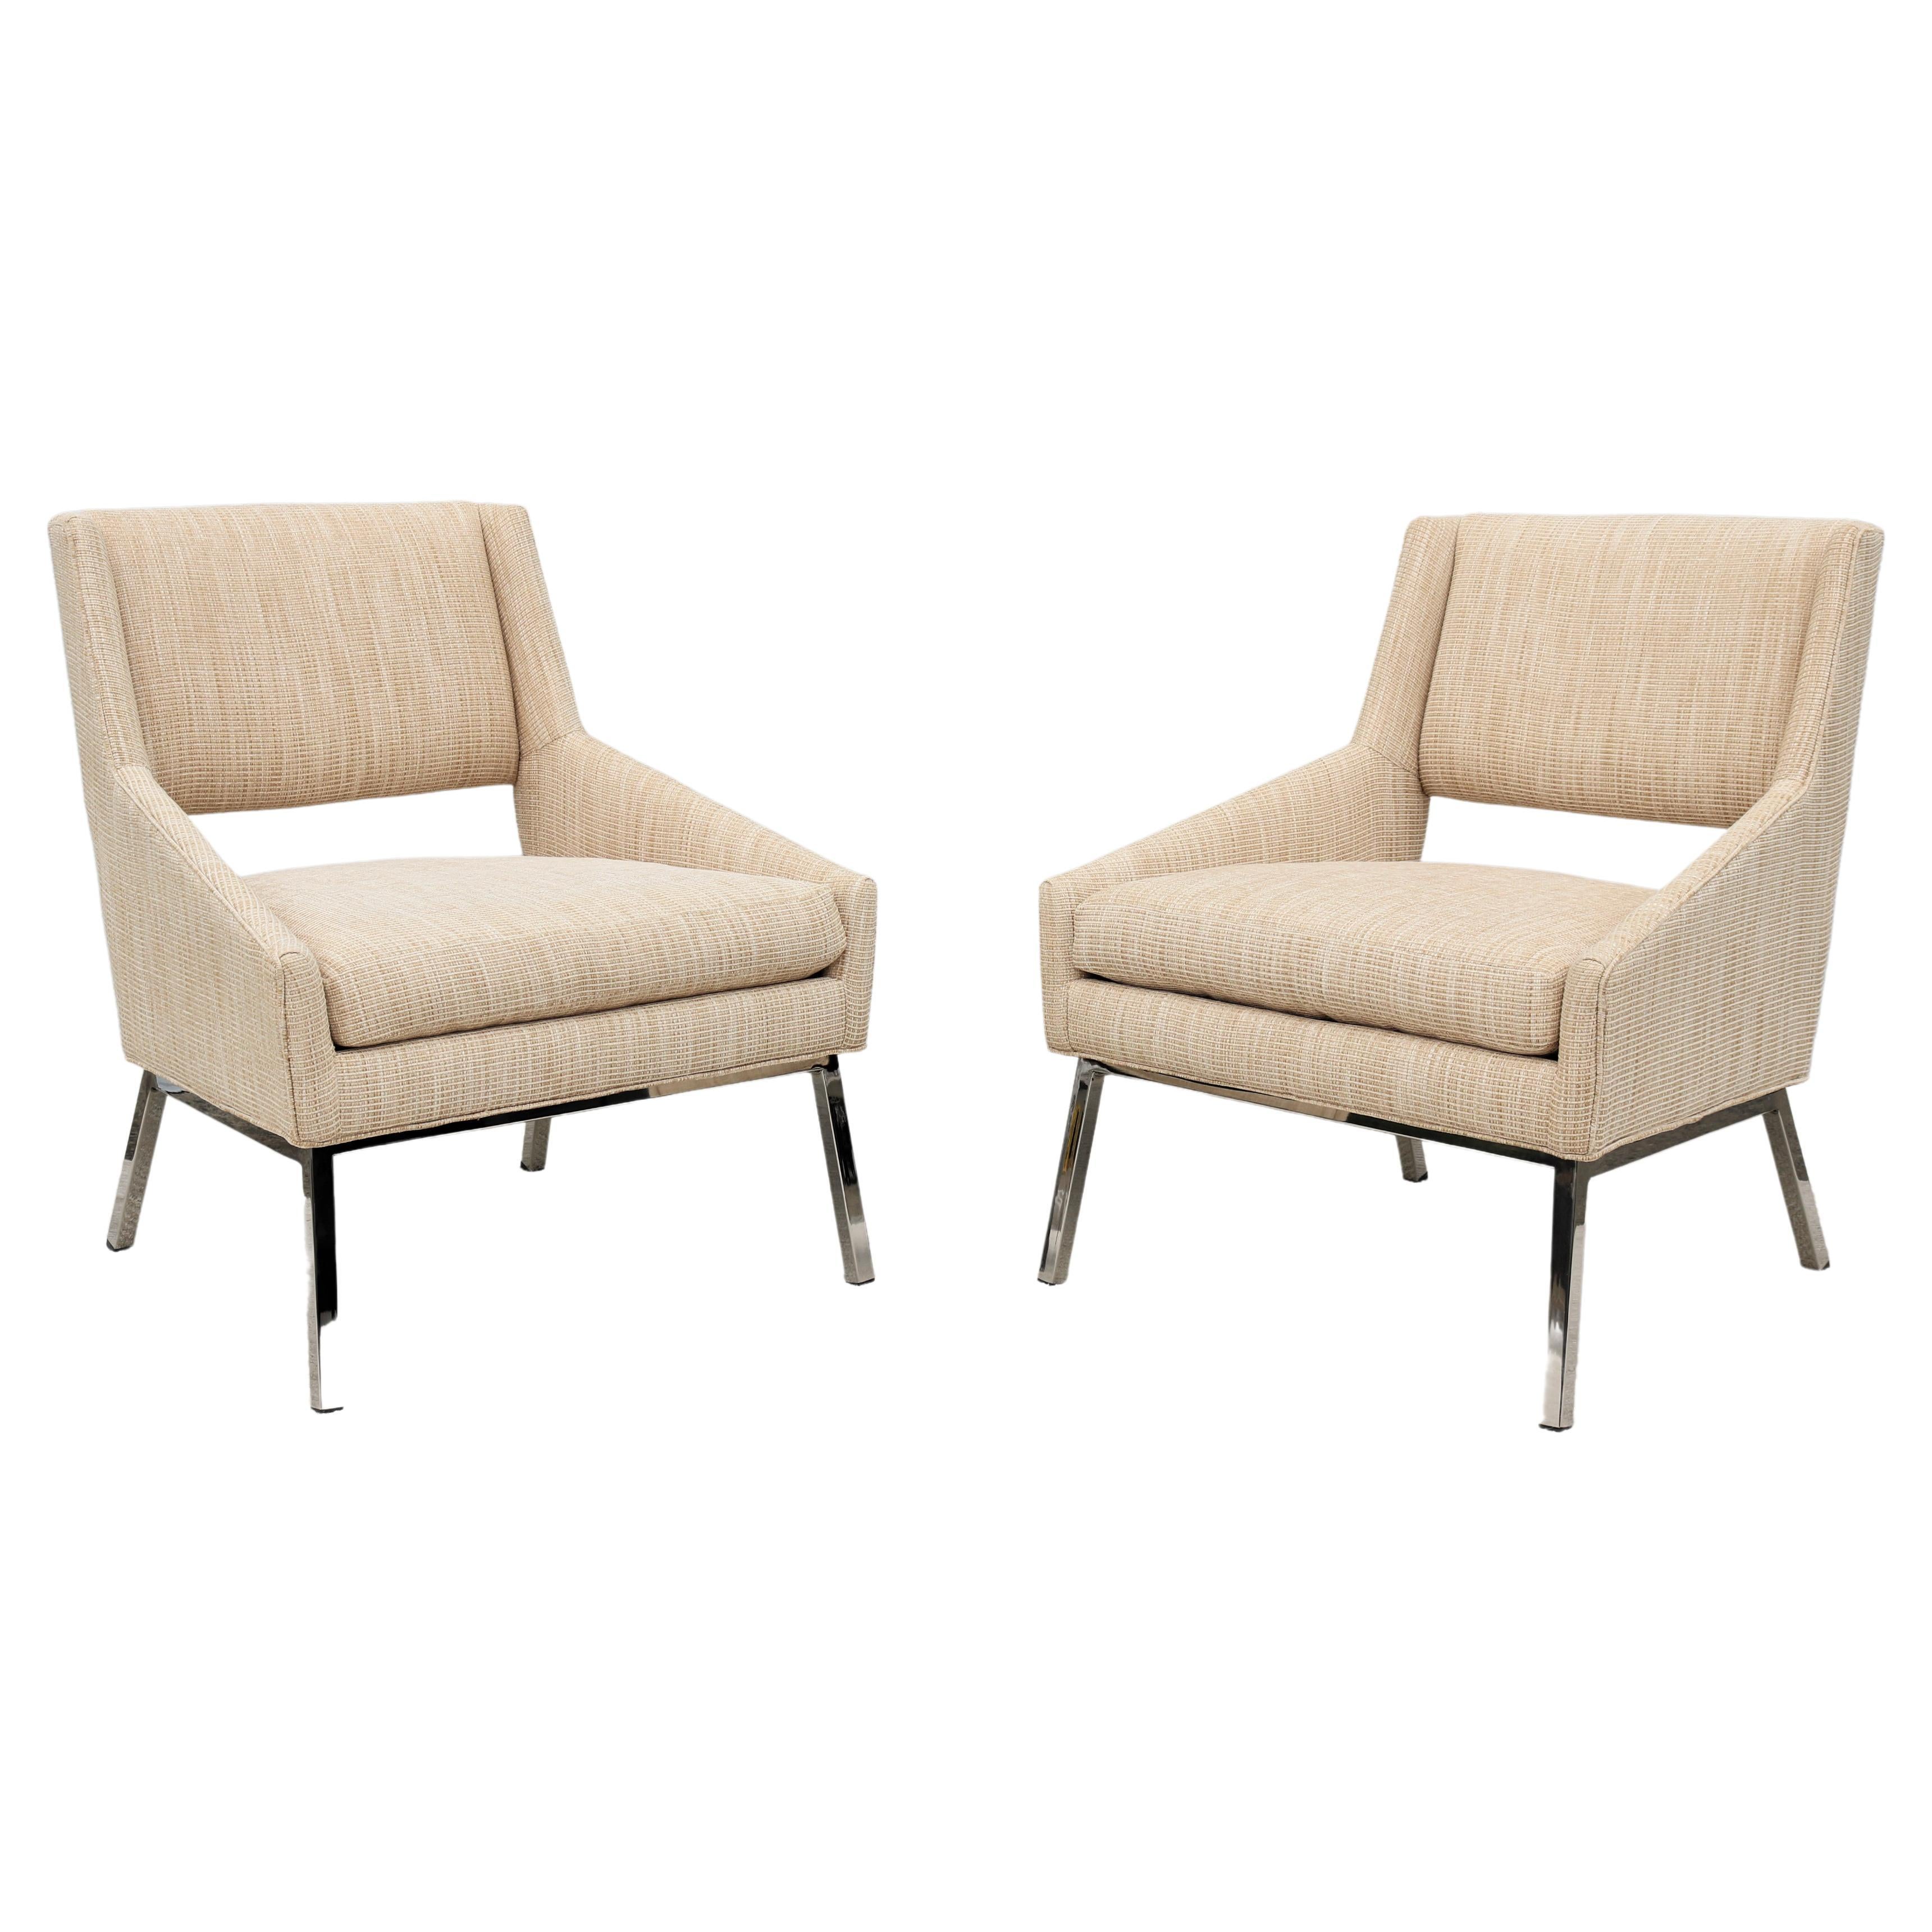 Mid-Century Modern Style Lexington Amani Beige Fabric Accent Chairs, a Pair For Sale